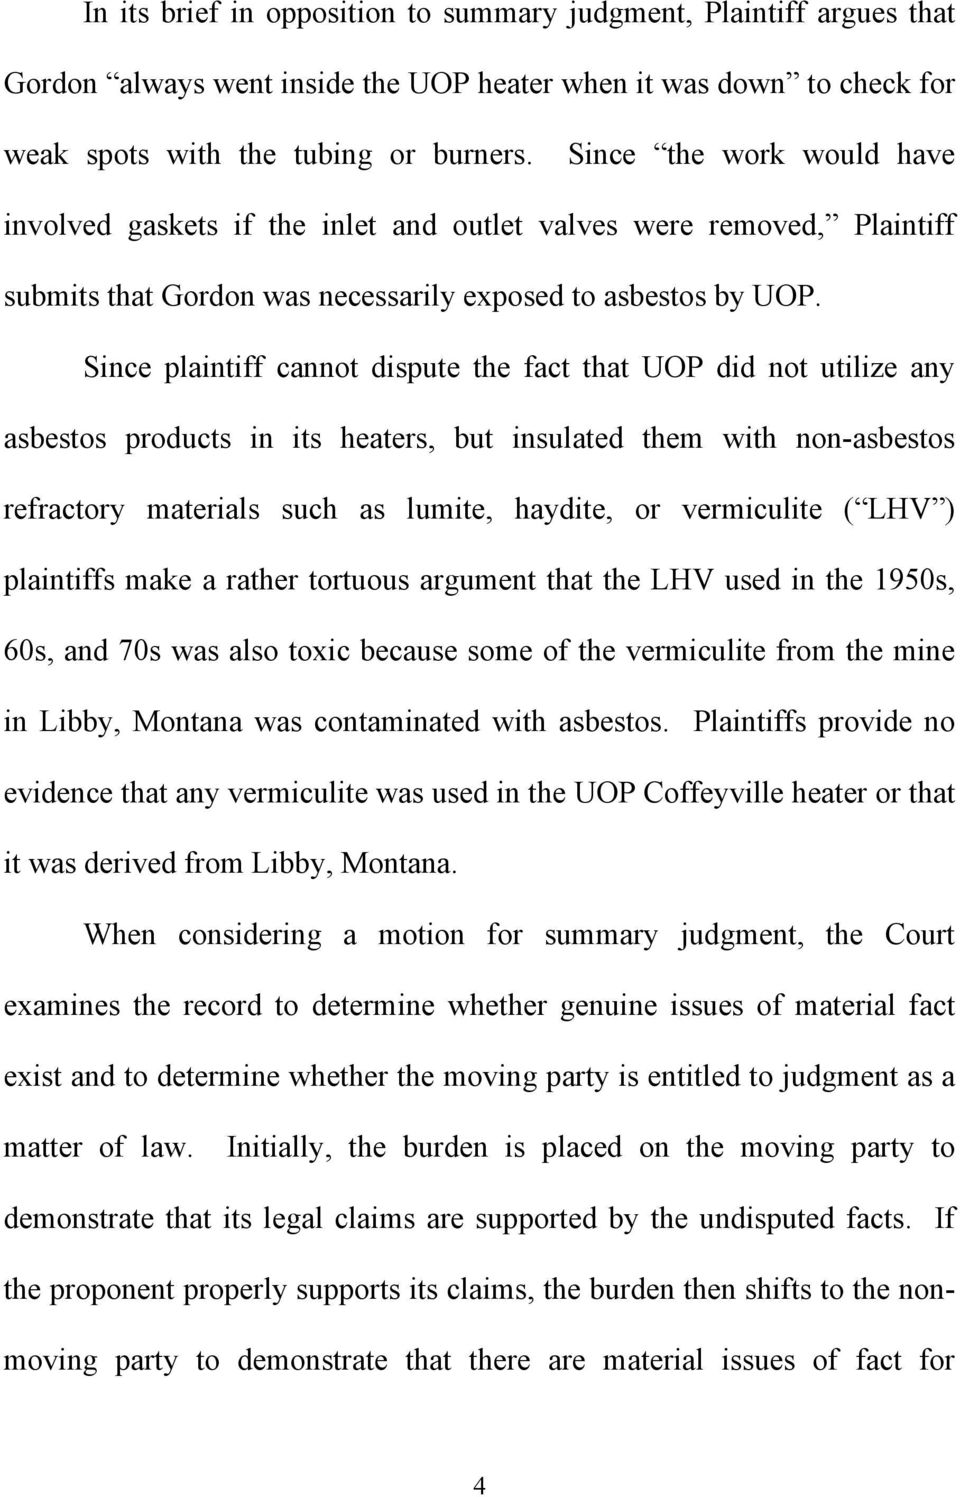 Since plaintiff cannot dispute the fact that UOP did not utilize any asbestos products in its heaters, but insulated them with non-asbestos refractory materials such as lumite, haydite, or